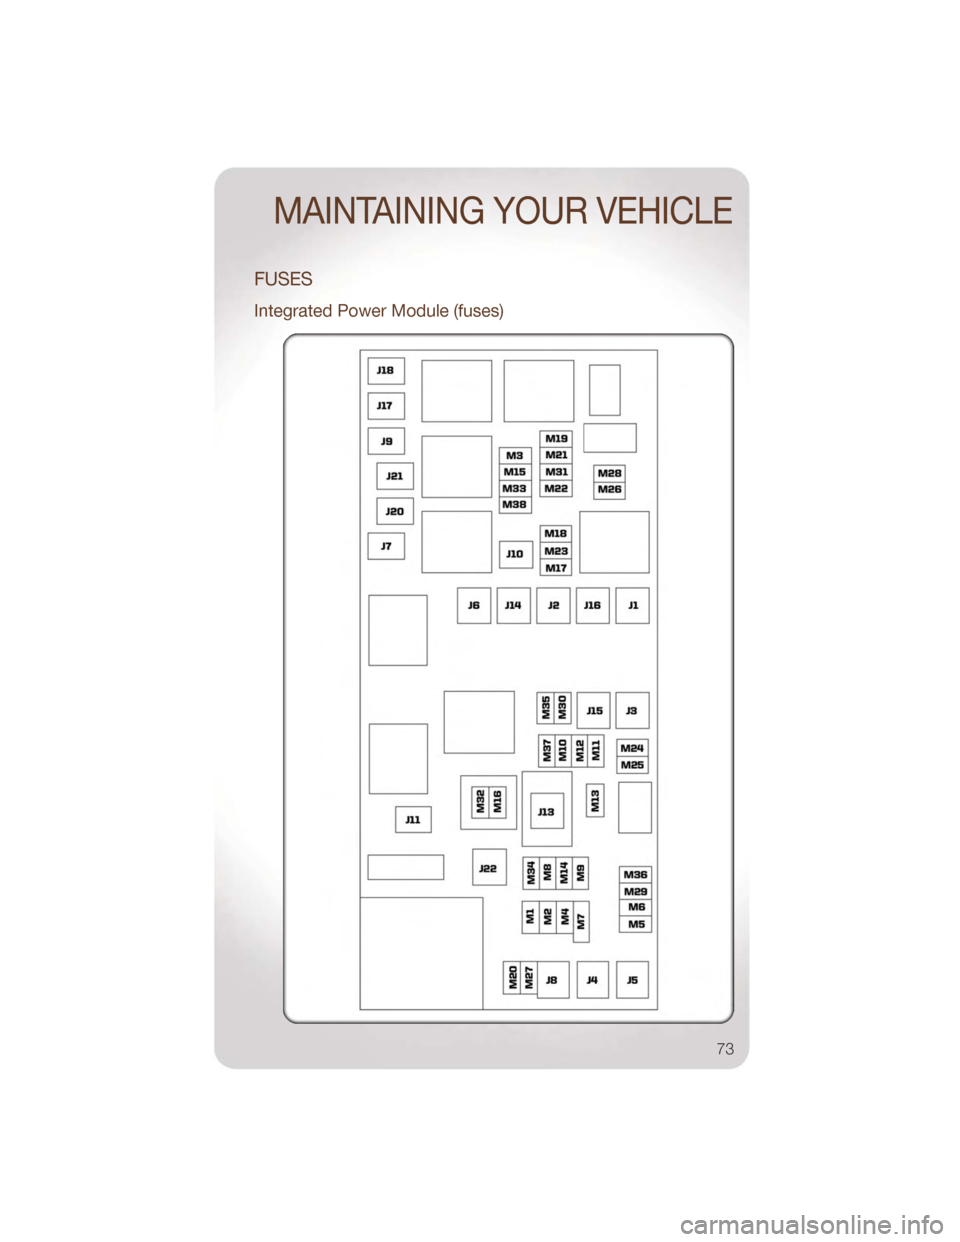 JEEP WRANGLER 2011 JK / 3.G User Guide FUSES
Integrated Power Module (fuses)
MAINTAINING YOUR VEHICLE
73 